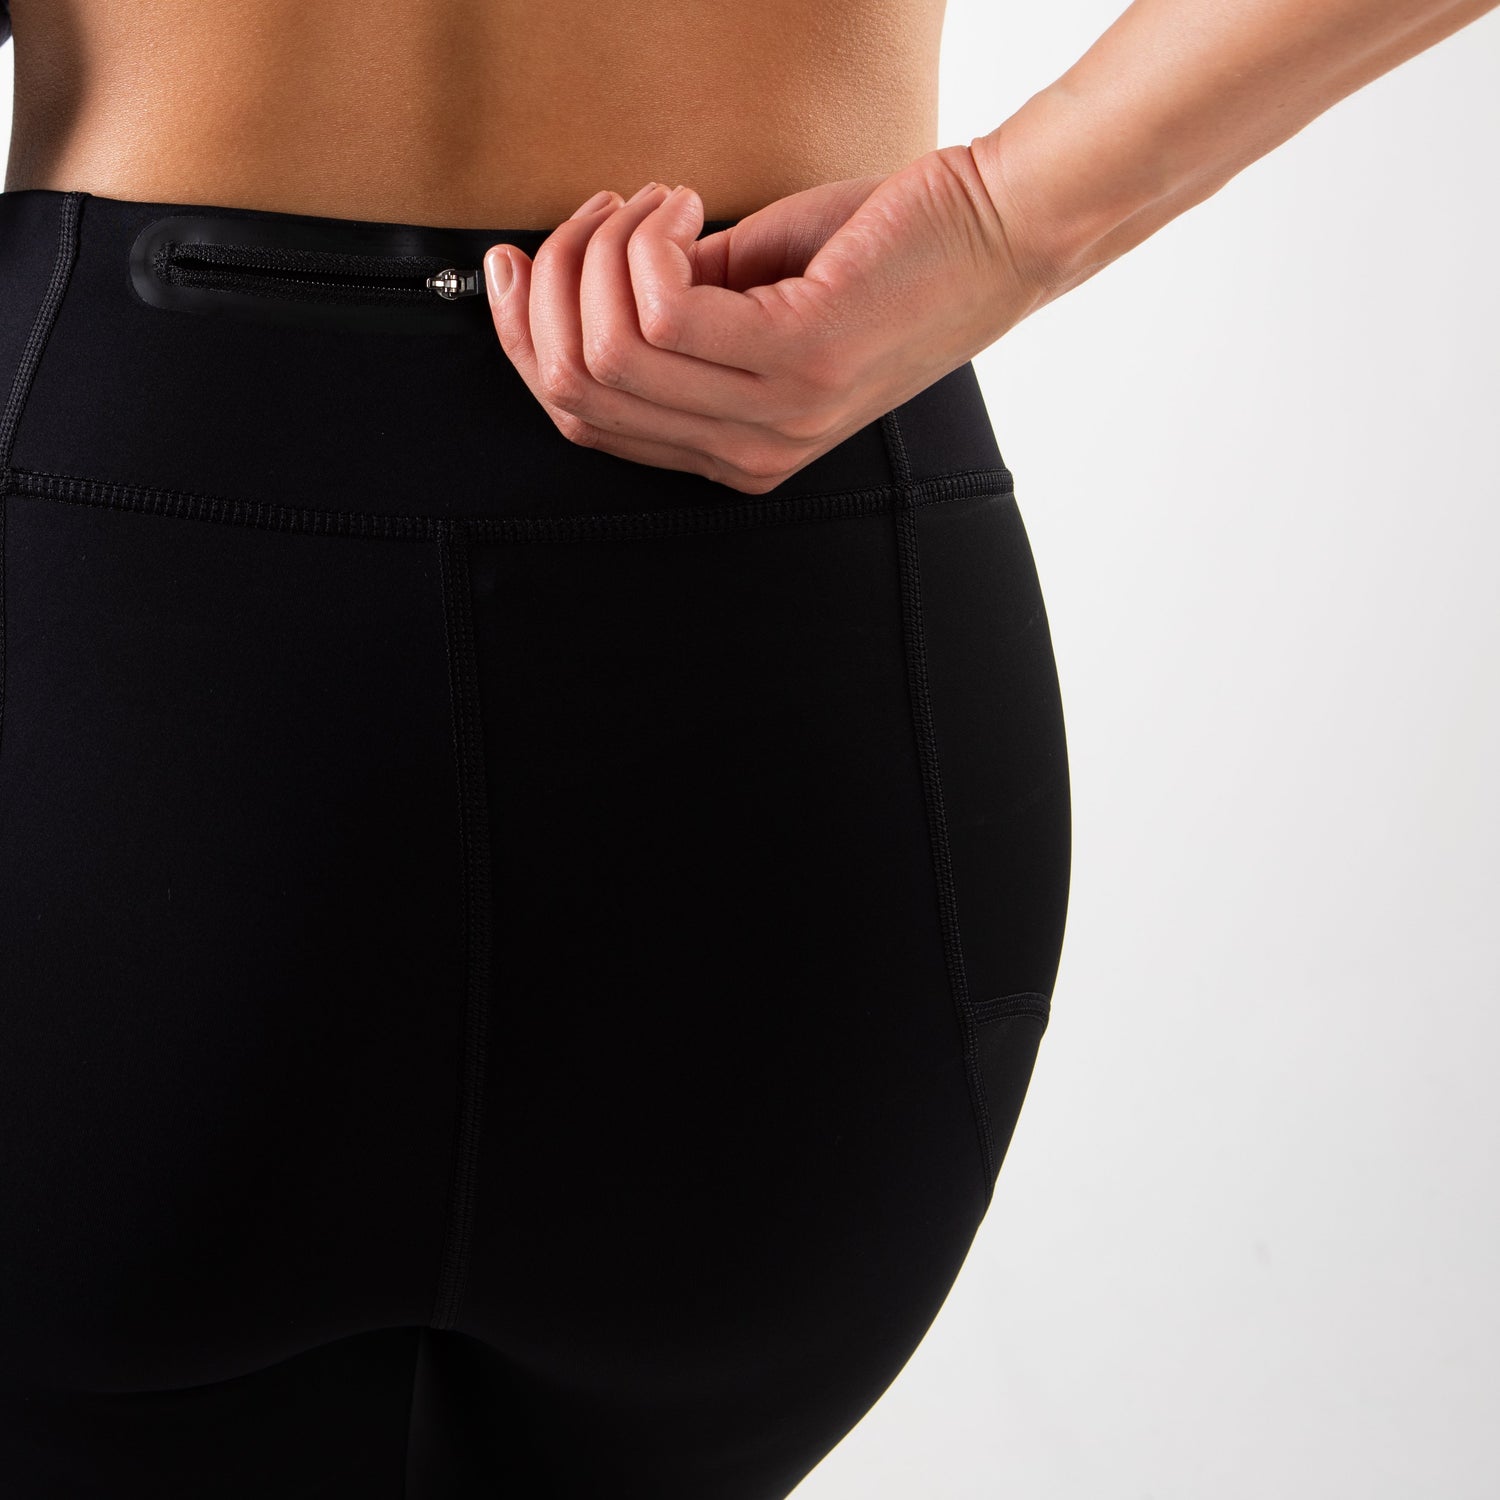 The ultimate running tight that provides medical-grade joint